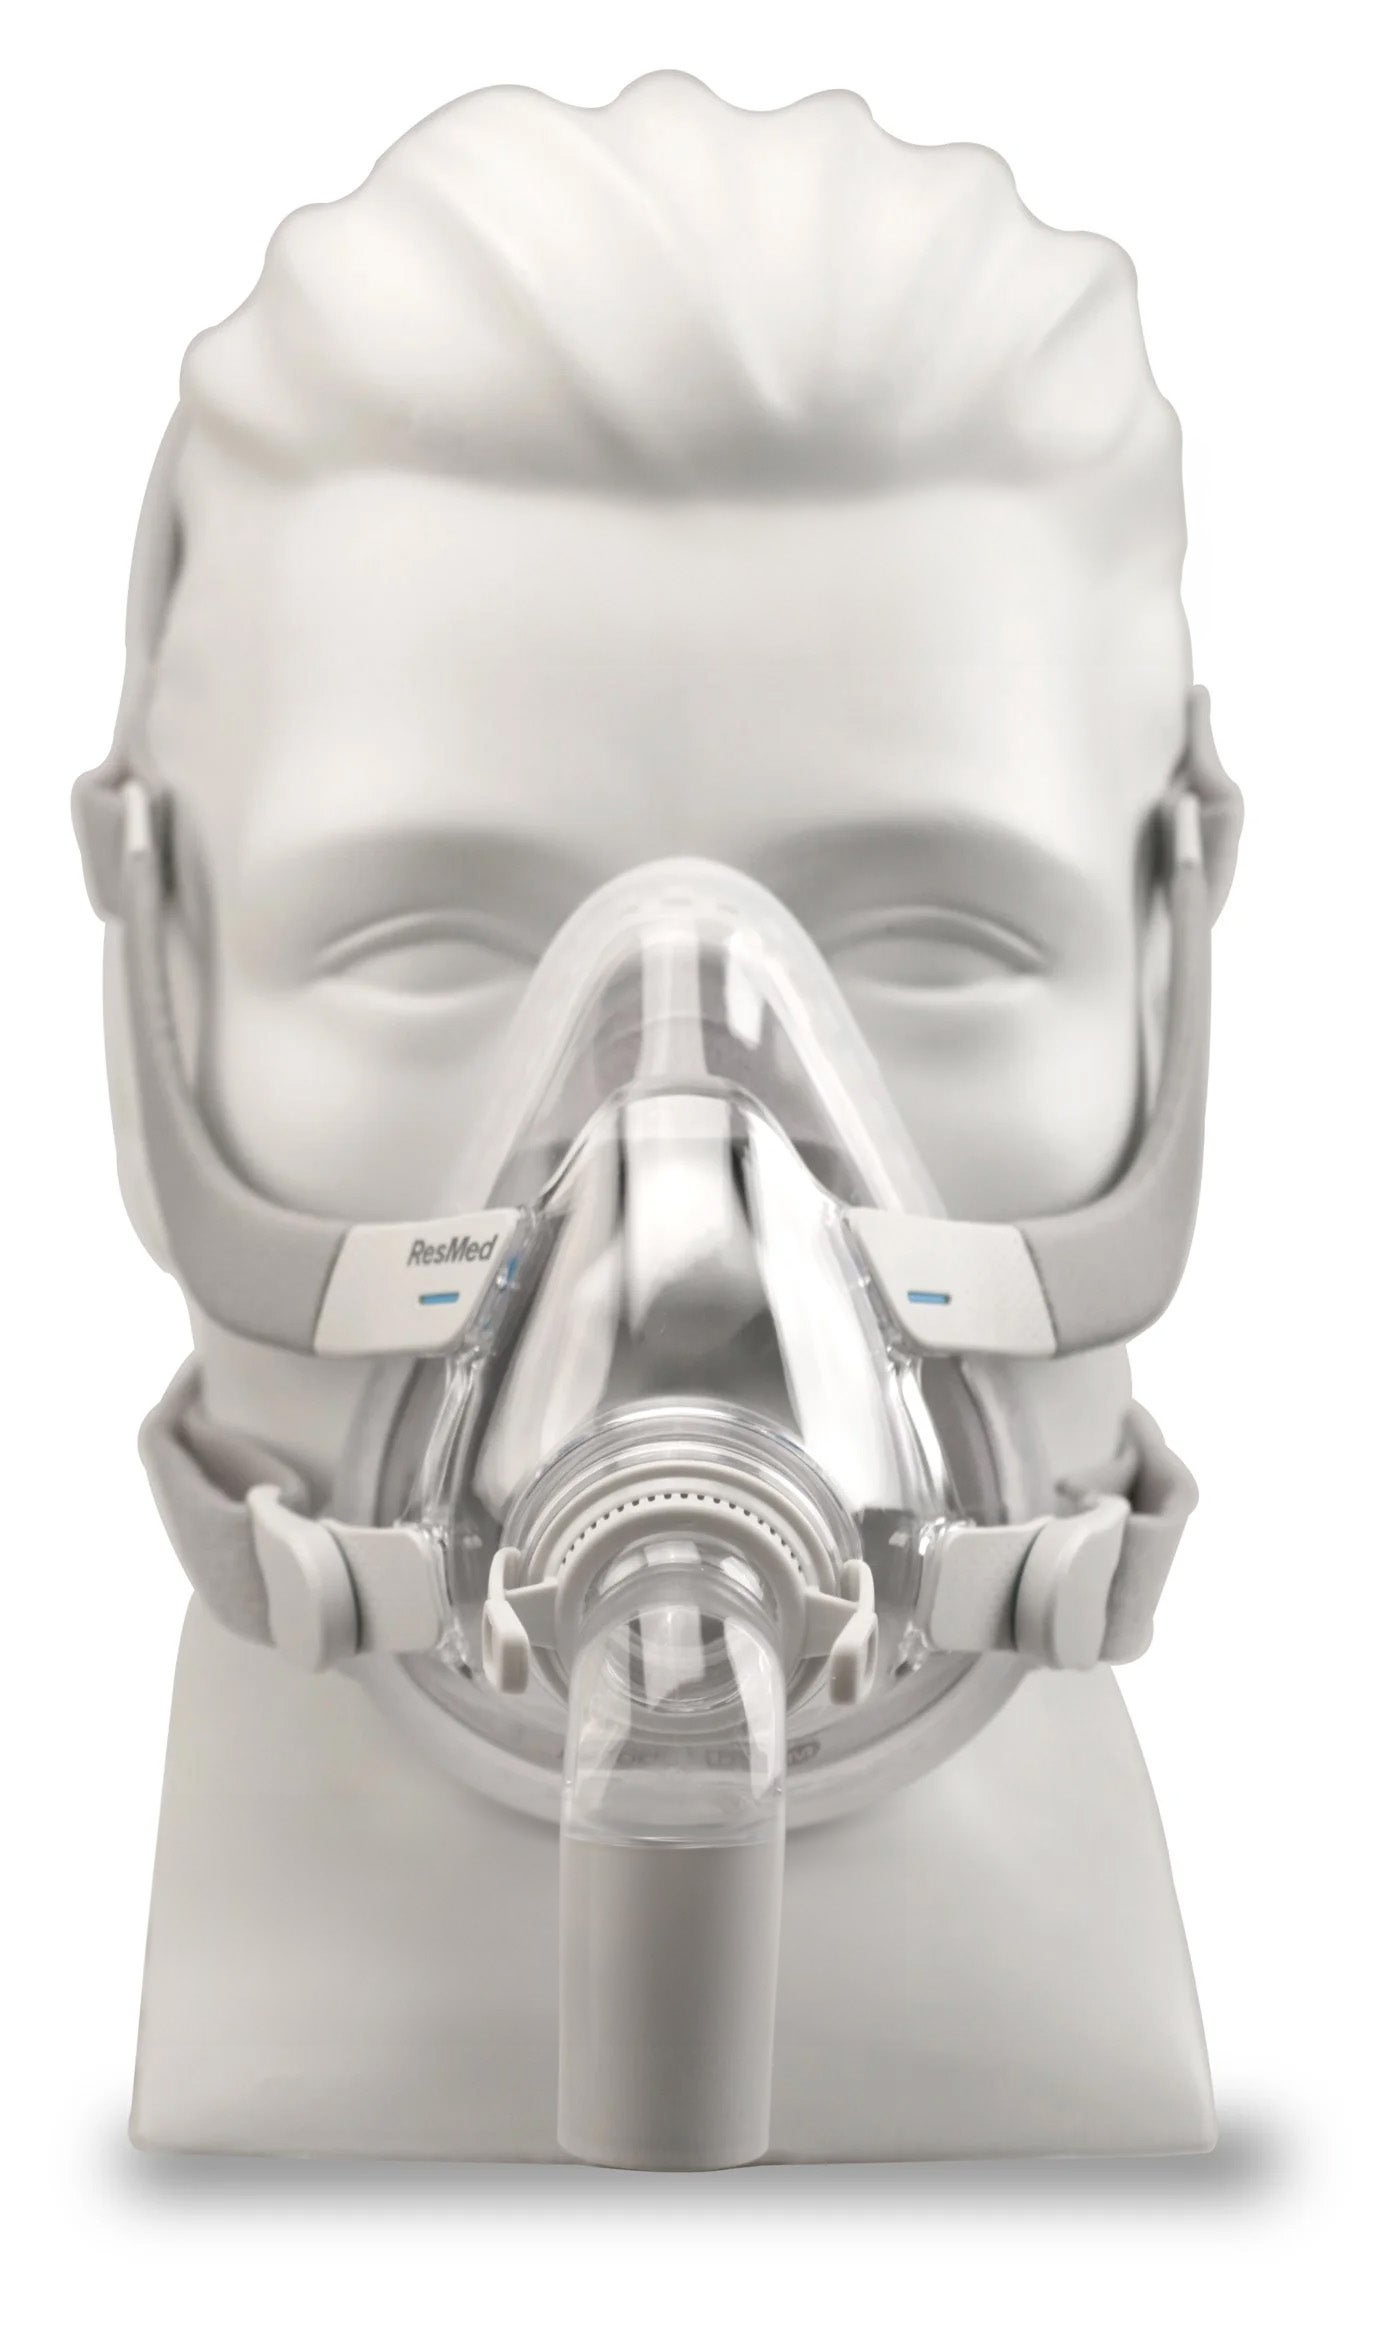 Resmed Airtouch F20™ Full Face Cpap Mask With Headgear 3990